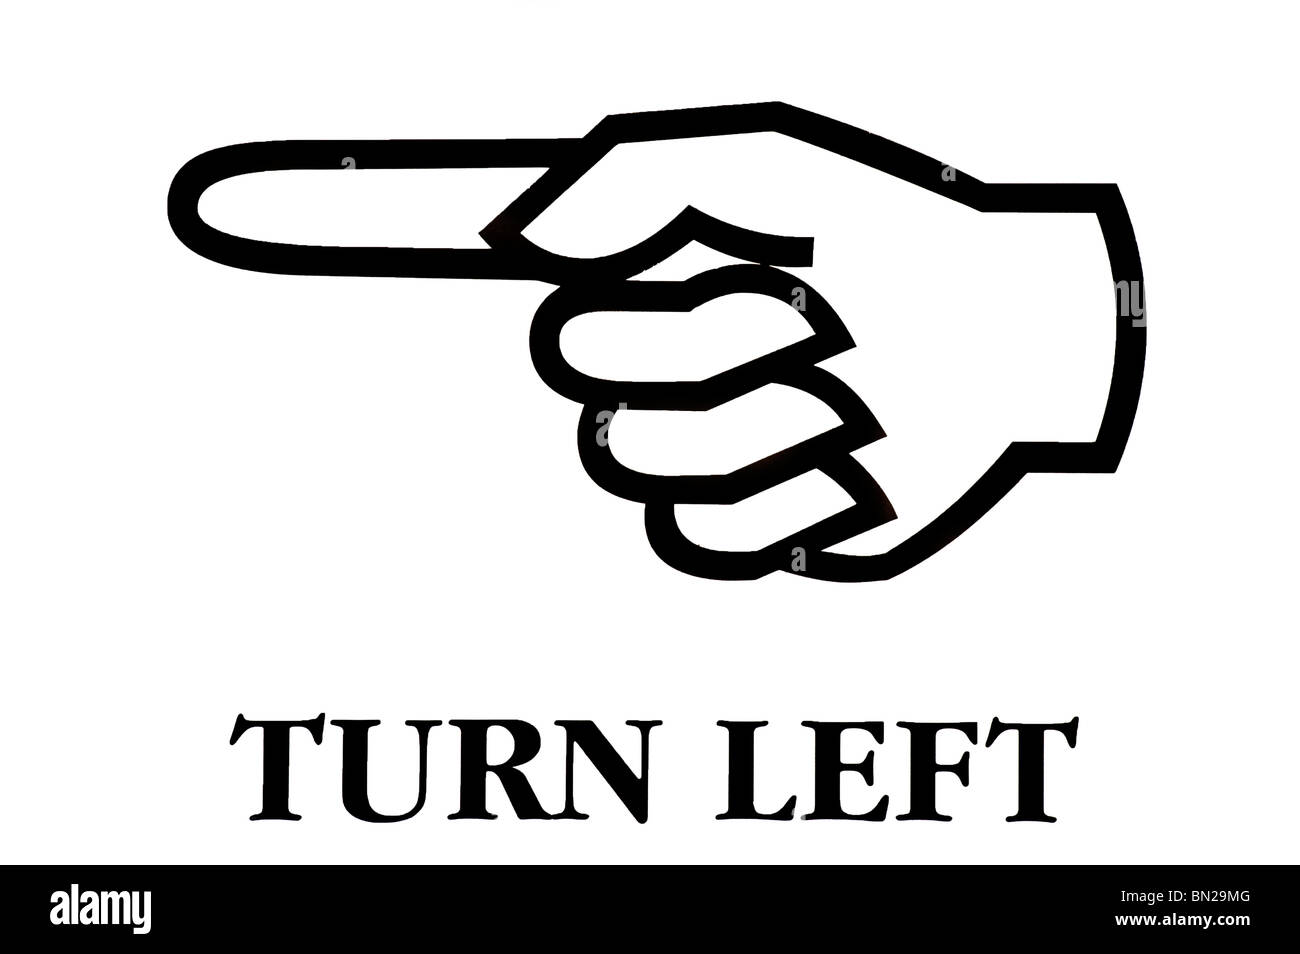 Turn left, pointing hand, directional sign in black and white Stock Photo